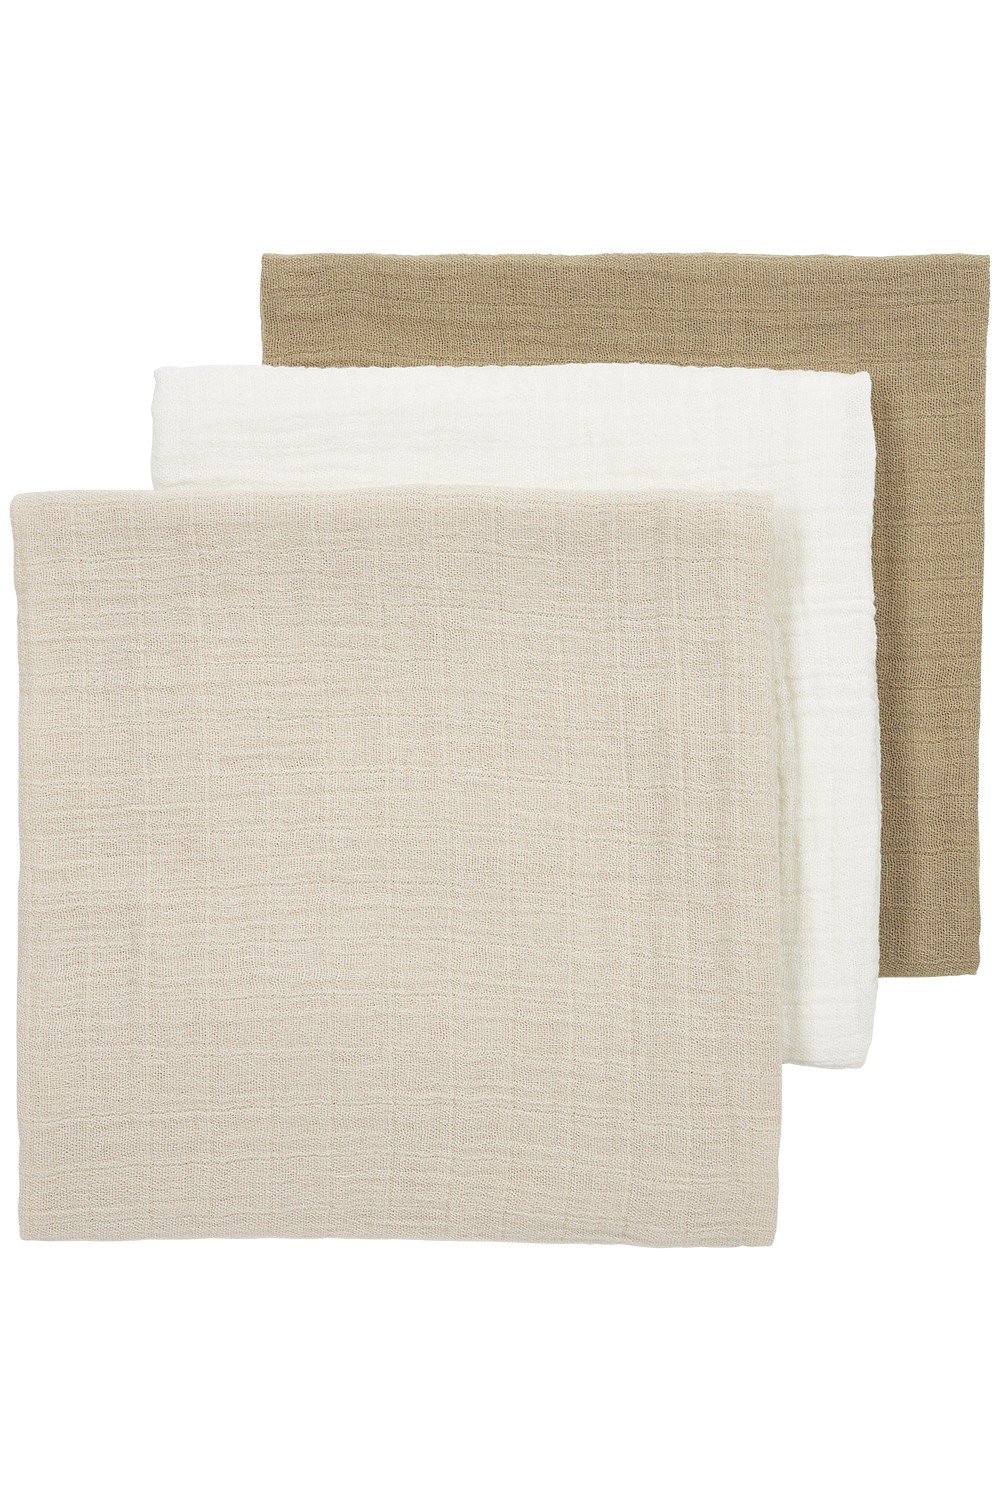 Pre-washed muslin squares 3-pack Uni - offwhite/soft sand/taupe - 70x70cm